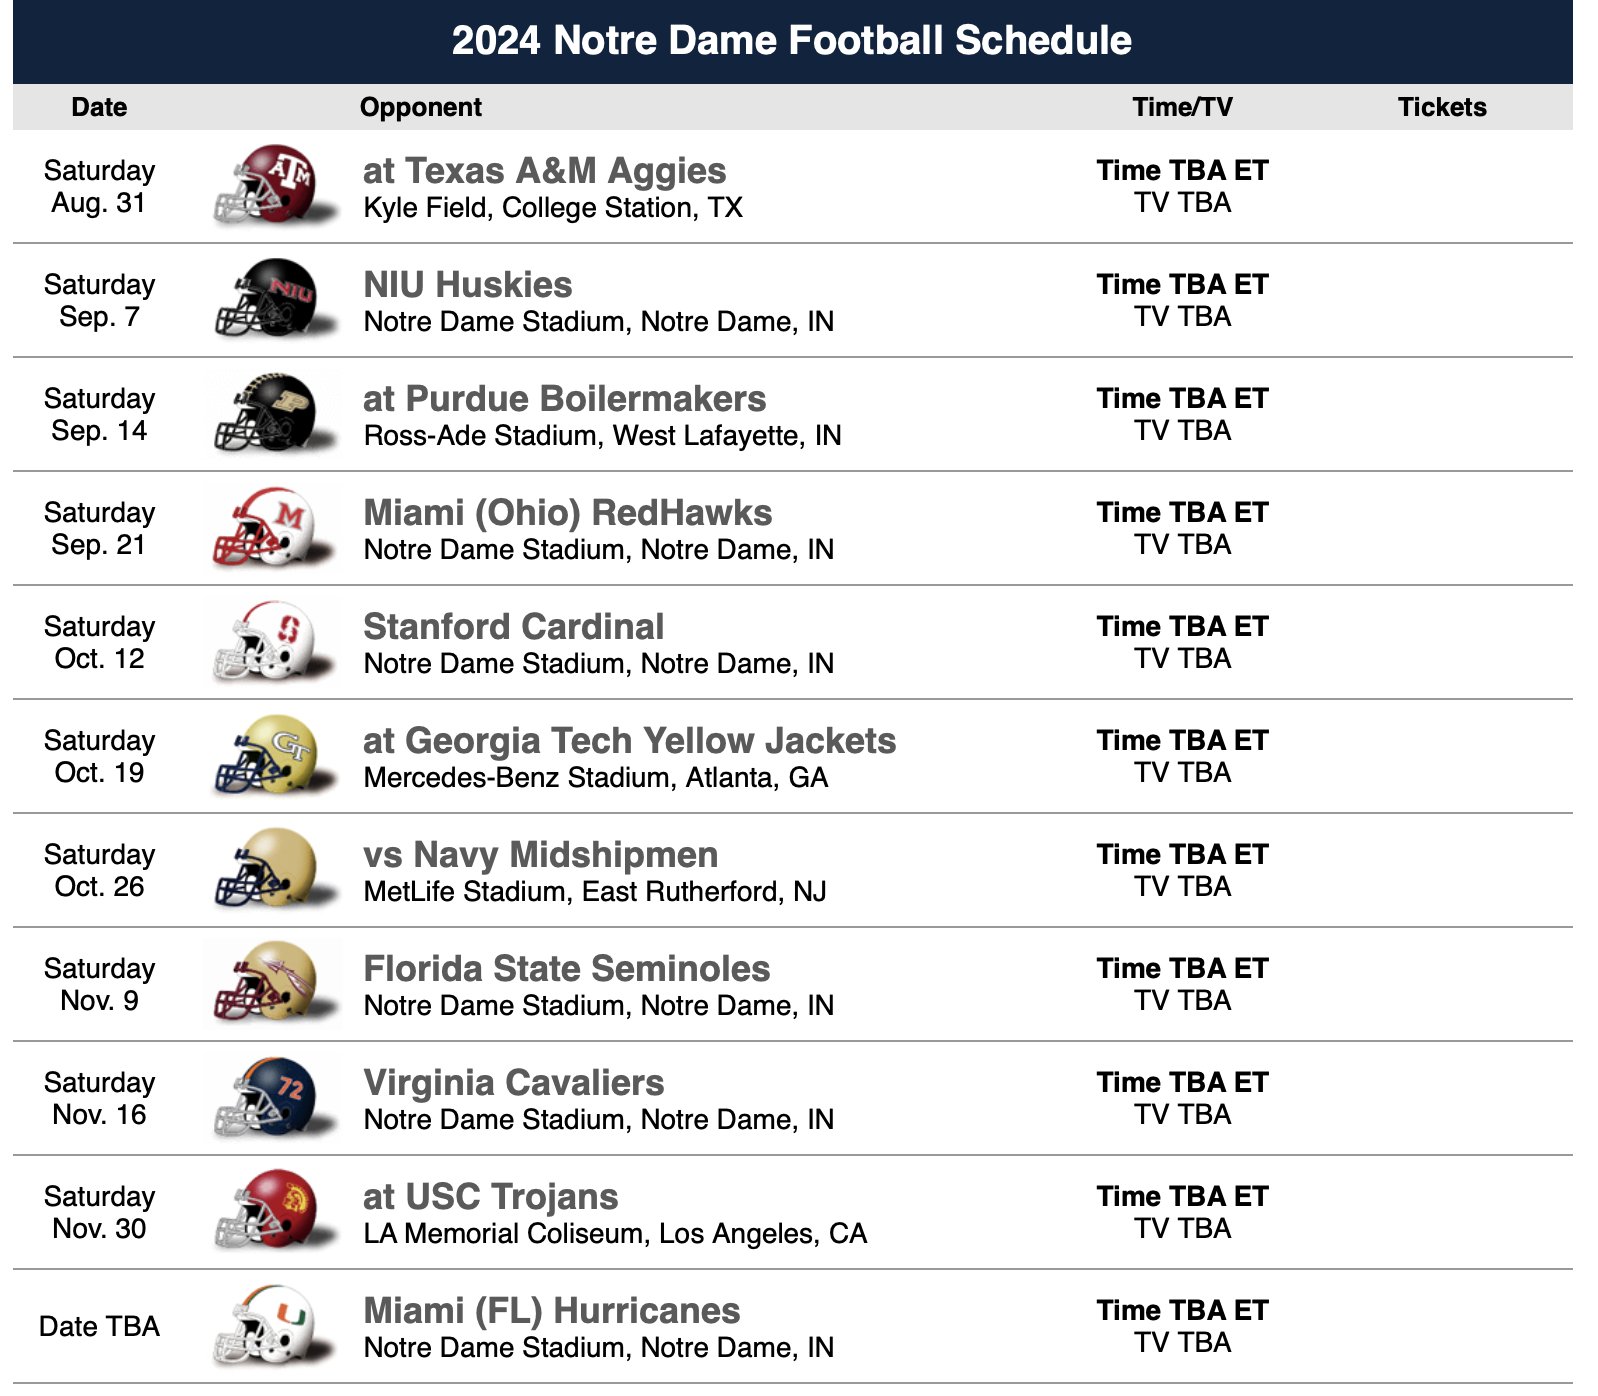 Notre Dame Football 2024 Schedule Csulb Schedule Of Classes Fall 2024